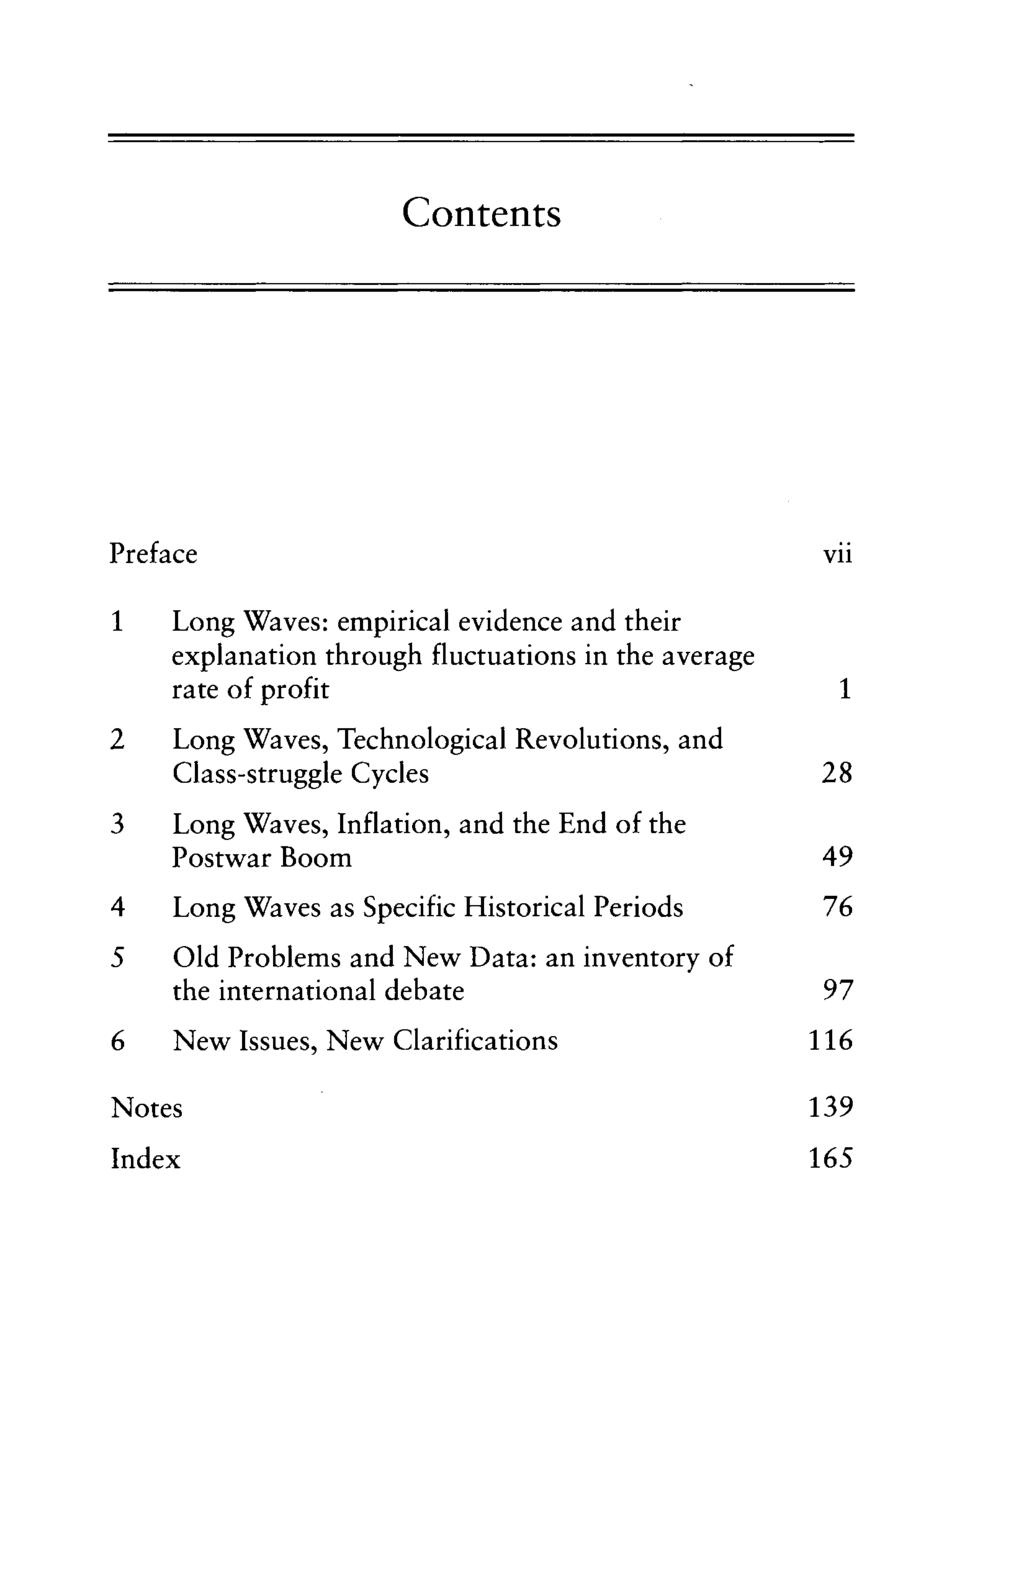 Contents Preface vu 1 Long Waves: empirical evidence and their explanation through fluctuations in the average rate of profit 1 2 Long Waves, Technological Revolutions, and Class-struggle Cycles 28 3